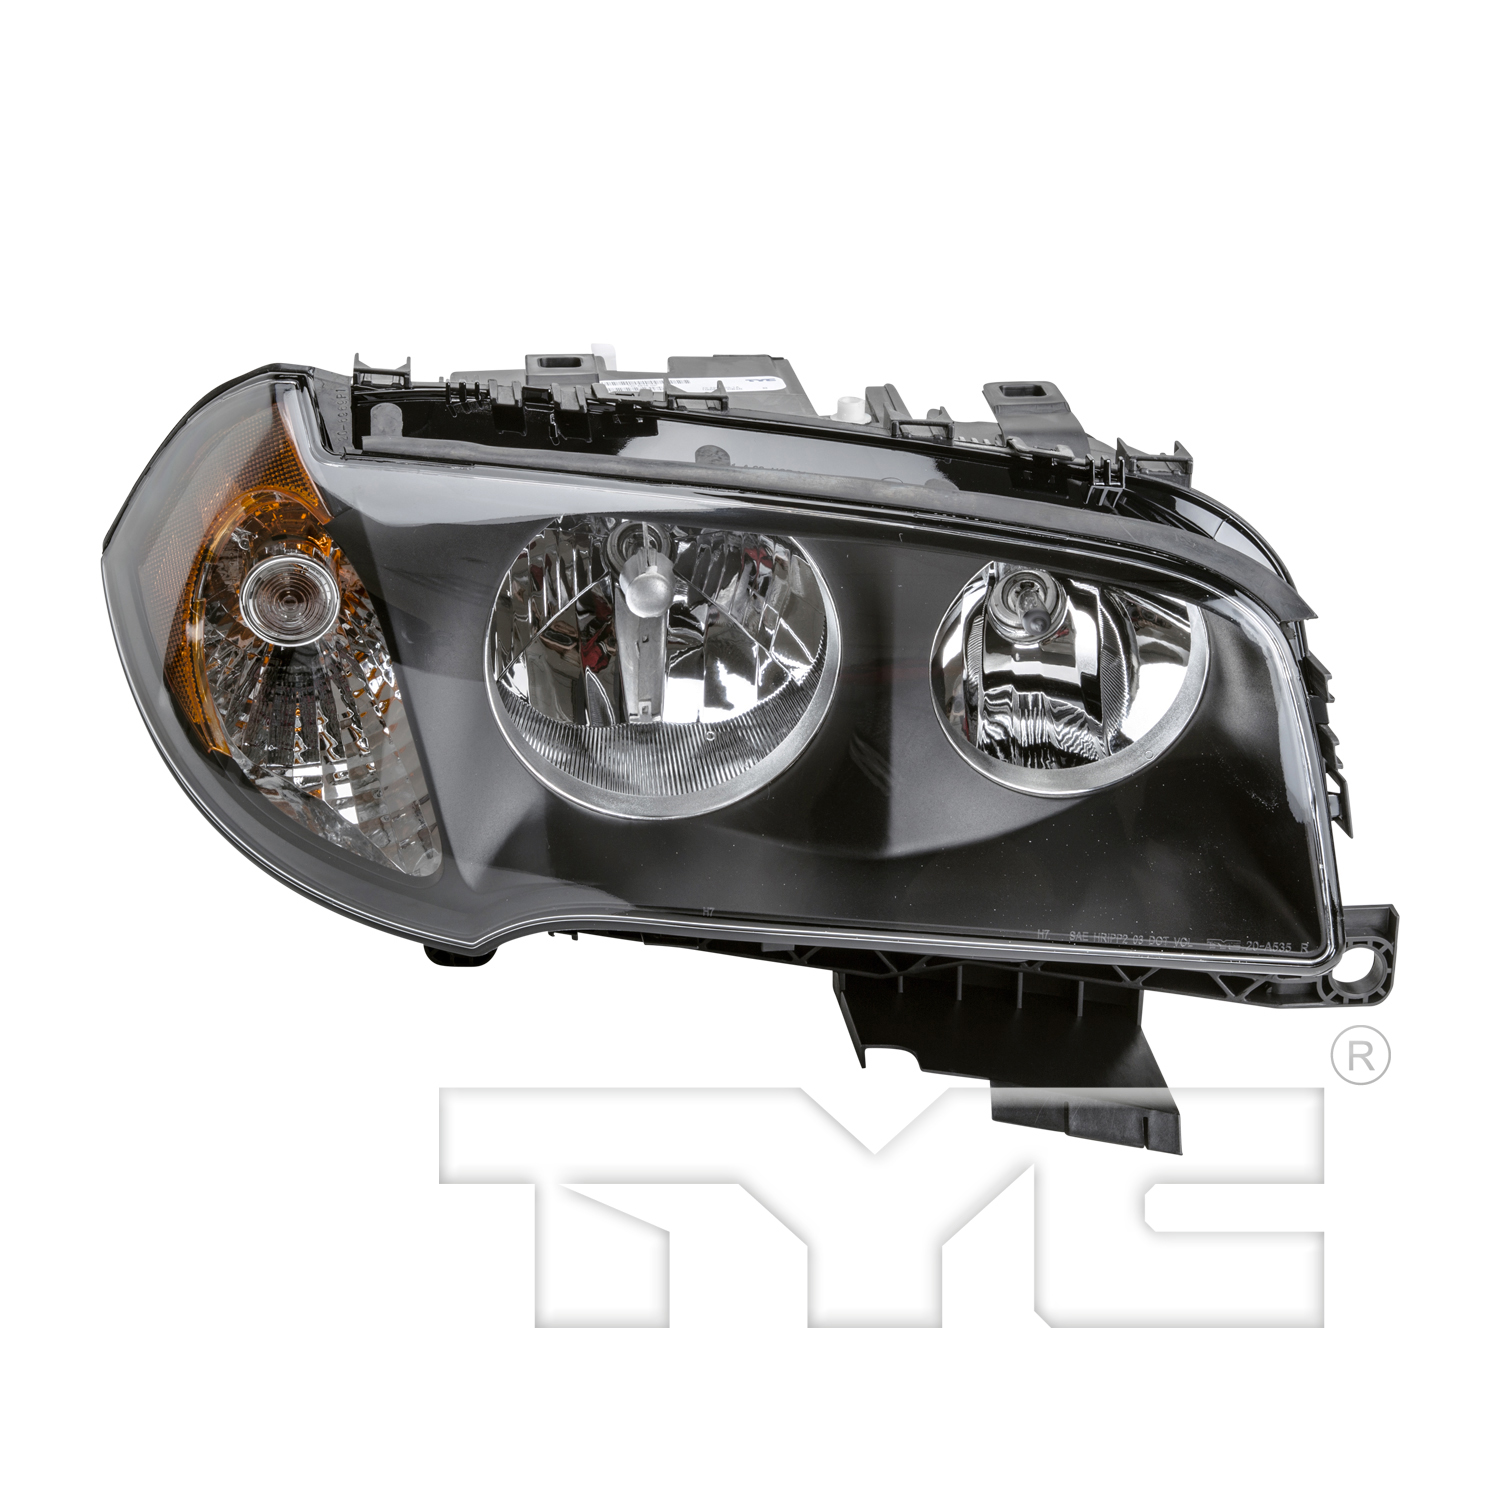 Aftermarket HEADLIGHTS for BMW - X3, X3,04-06,RT Headlamp assy composite